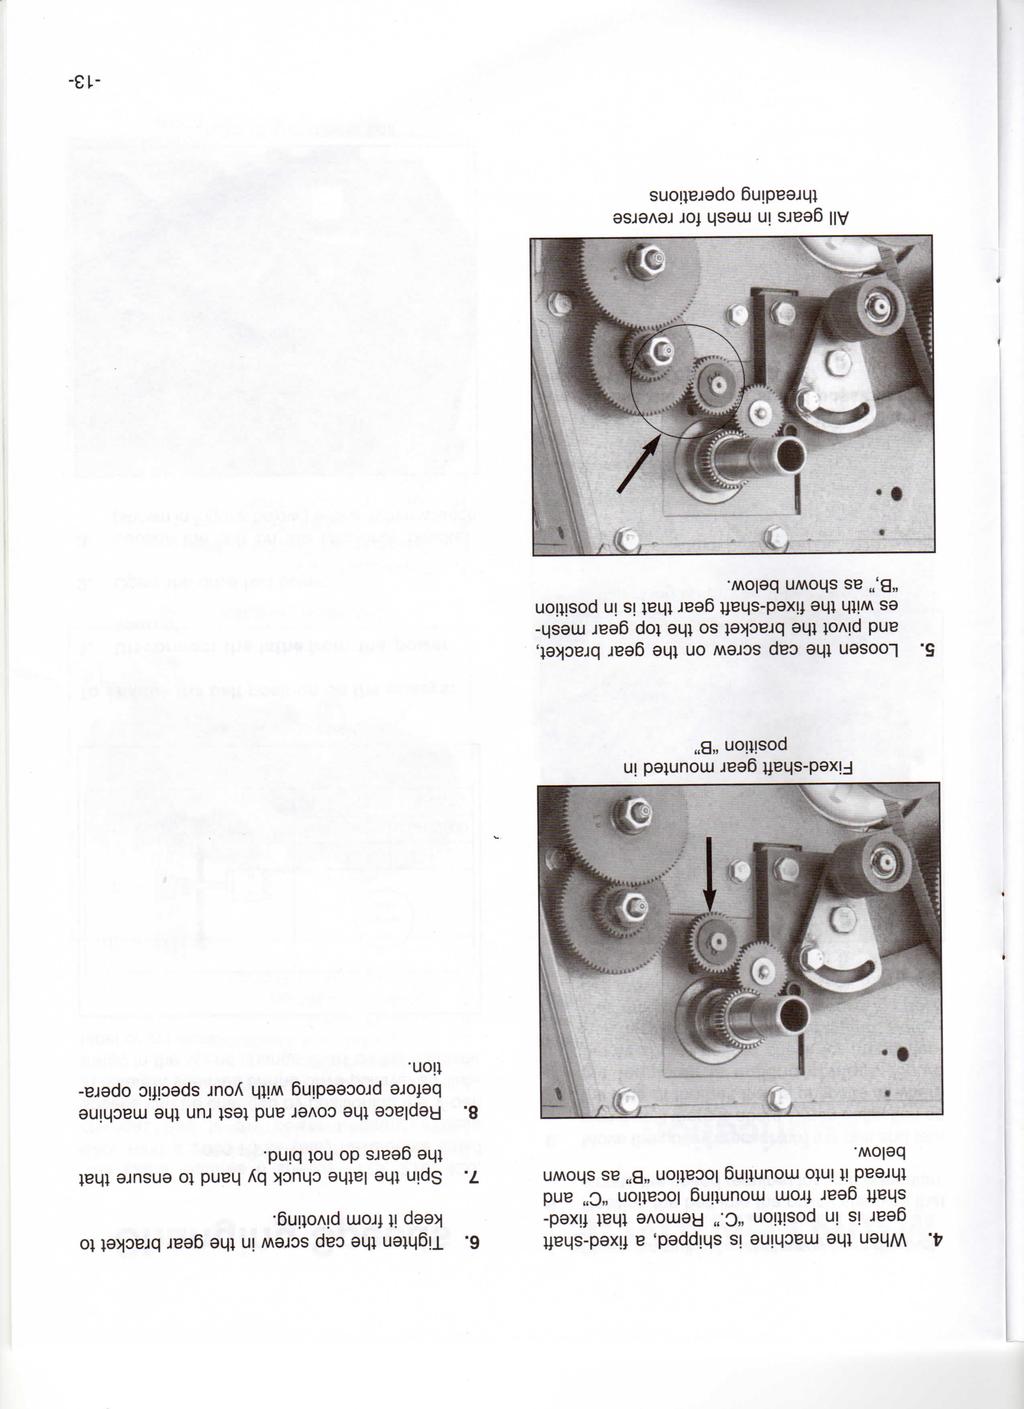 4. When the machne s shpped, a fxed-shaft gear s n poston "C." Remove that fxedshaft gear from mountng locaton "C" and thread t nto mountng locaton "B" as shown below. 6.